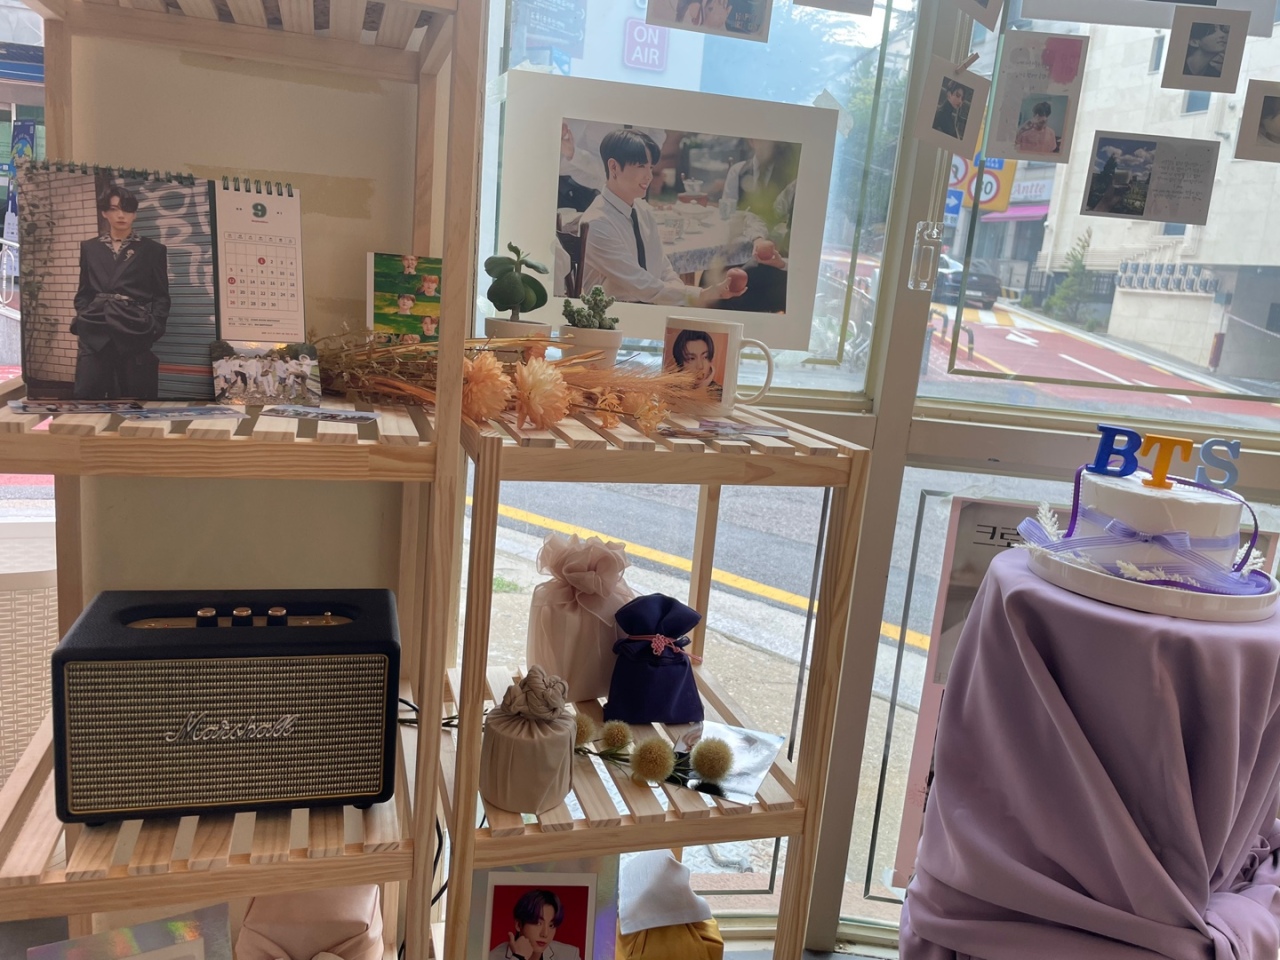 Exclusive goodies, such as the calendar and the mug, are exhibited on the shelving unit and the wall to celebrate Jung-kook’s birthday. (Kweon Ha-bin/The Korea Herald)